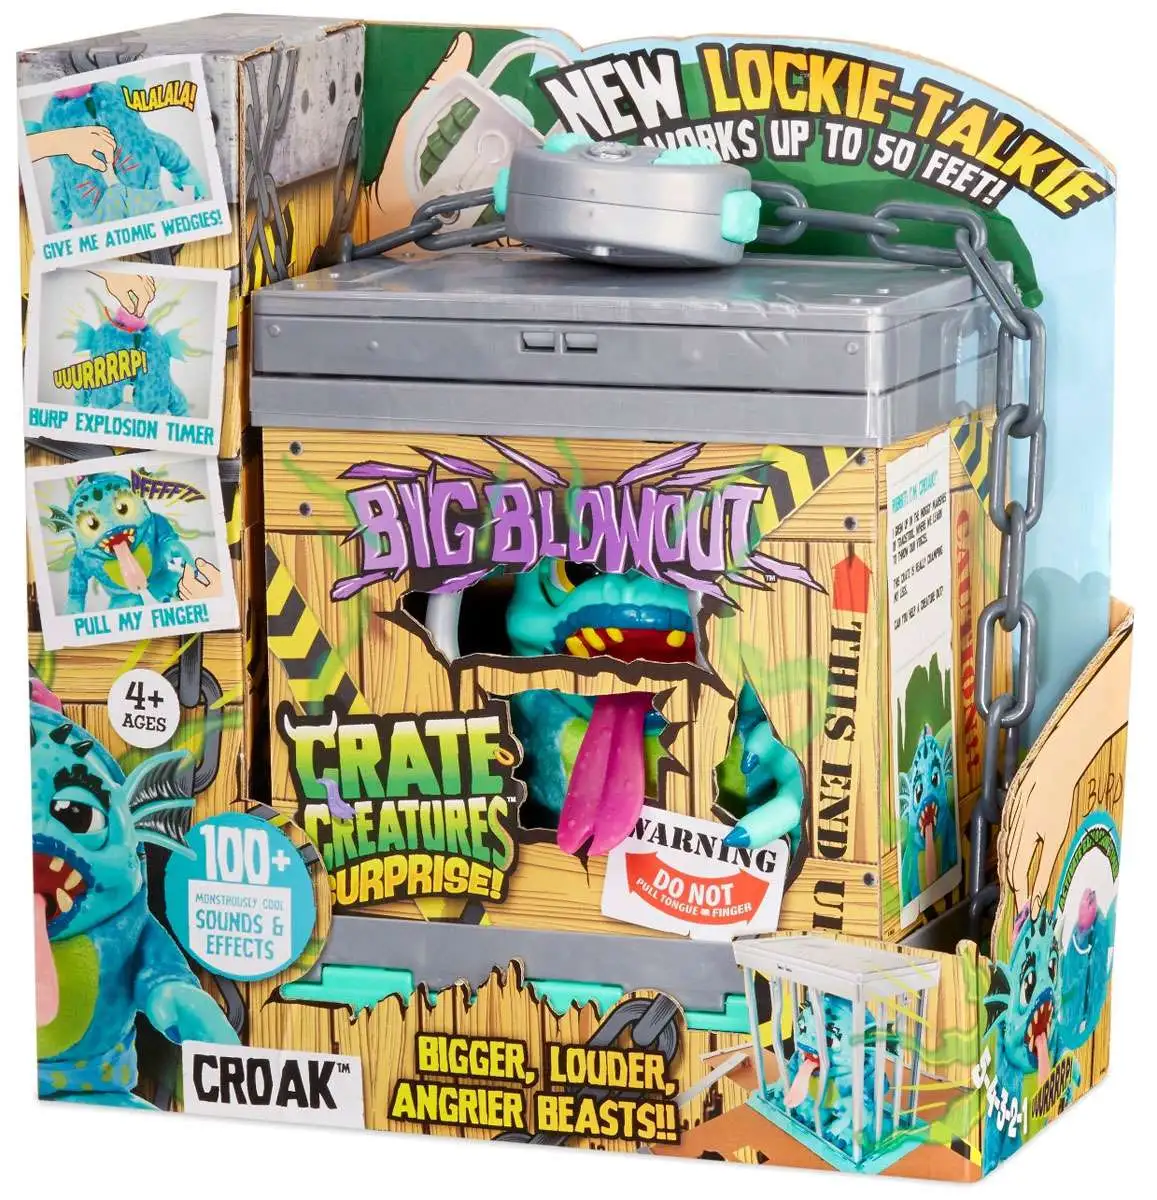 Crate Creatures Surprise Big BLOWOUT Guano With Lockie Talkie and 100 Sounds for sale online 